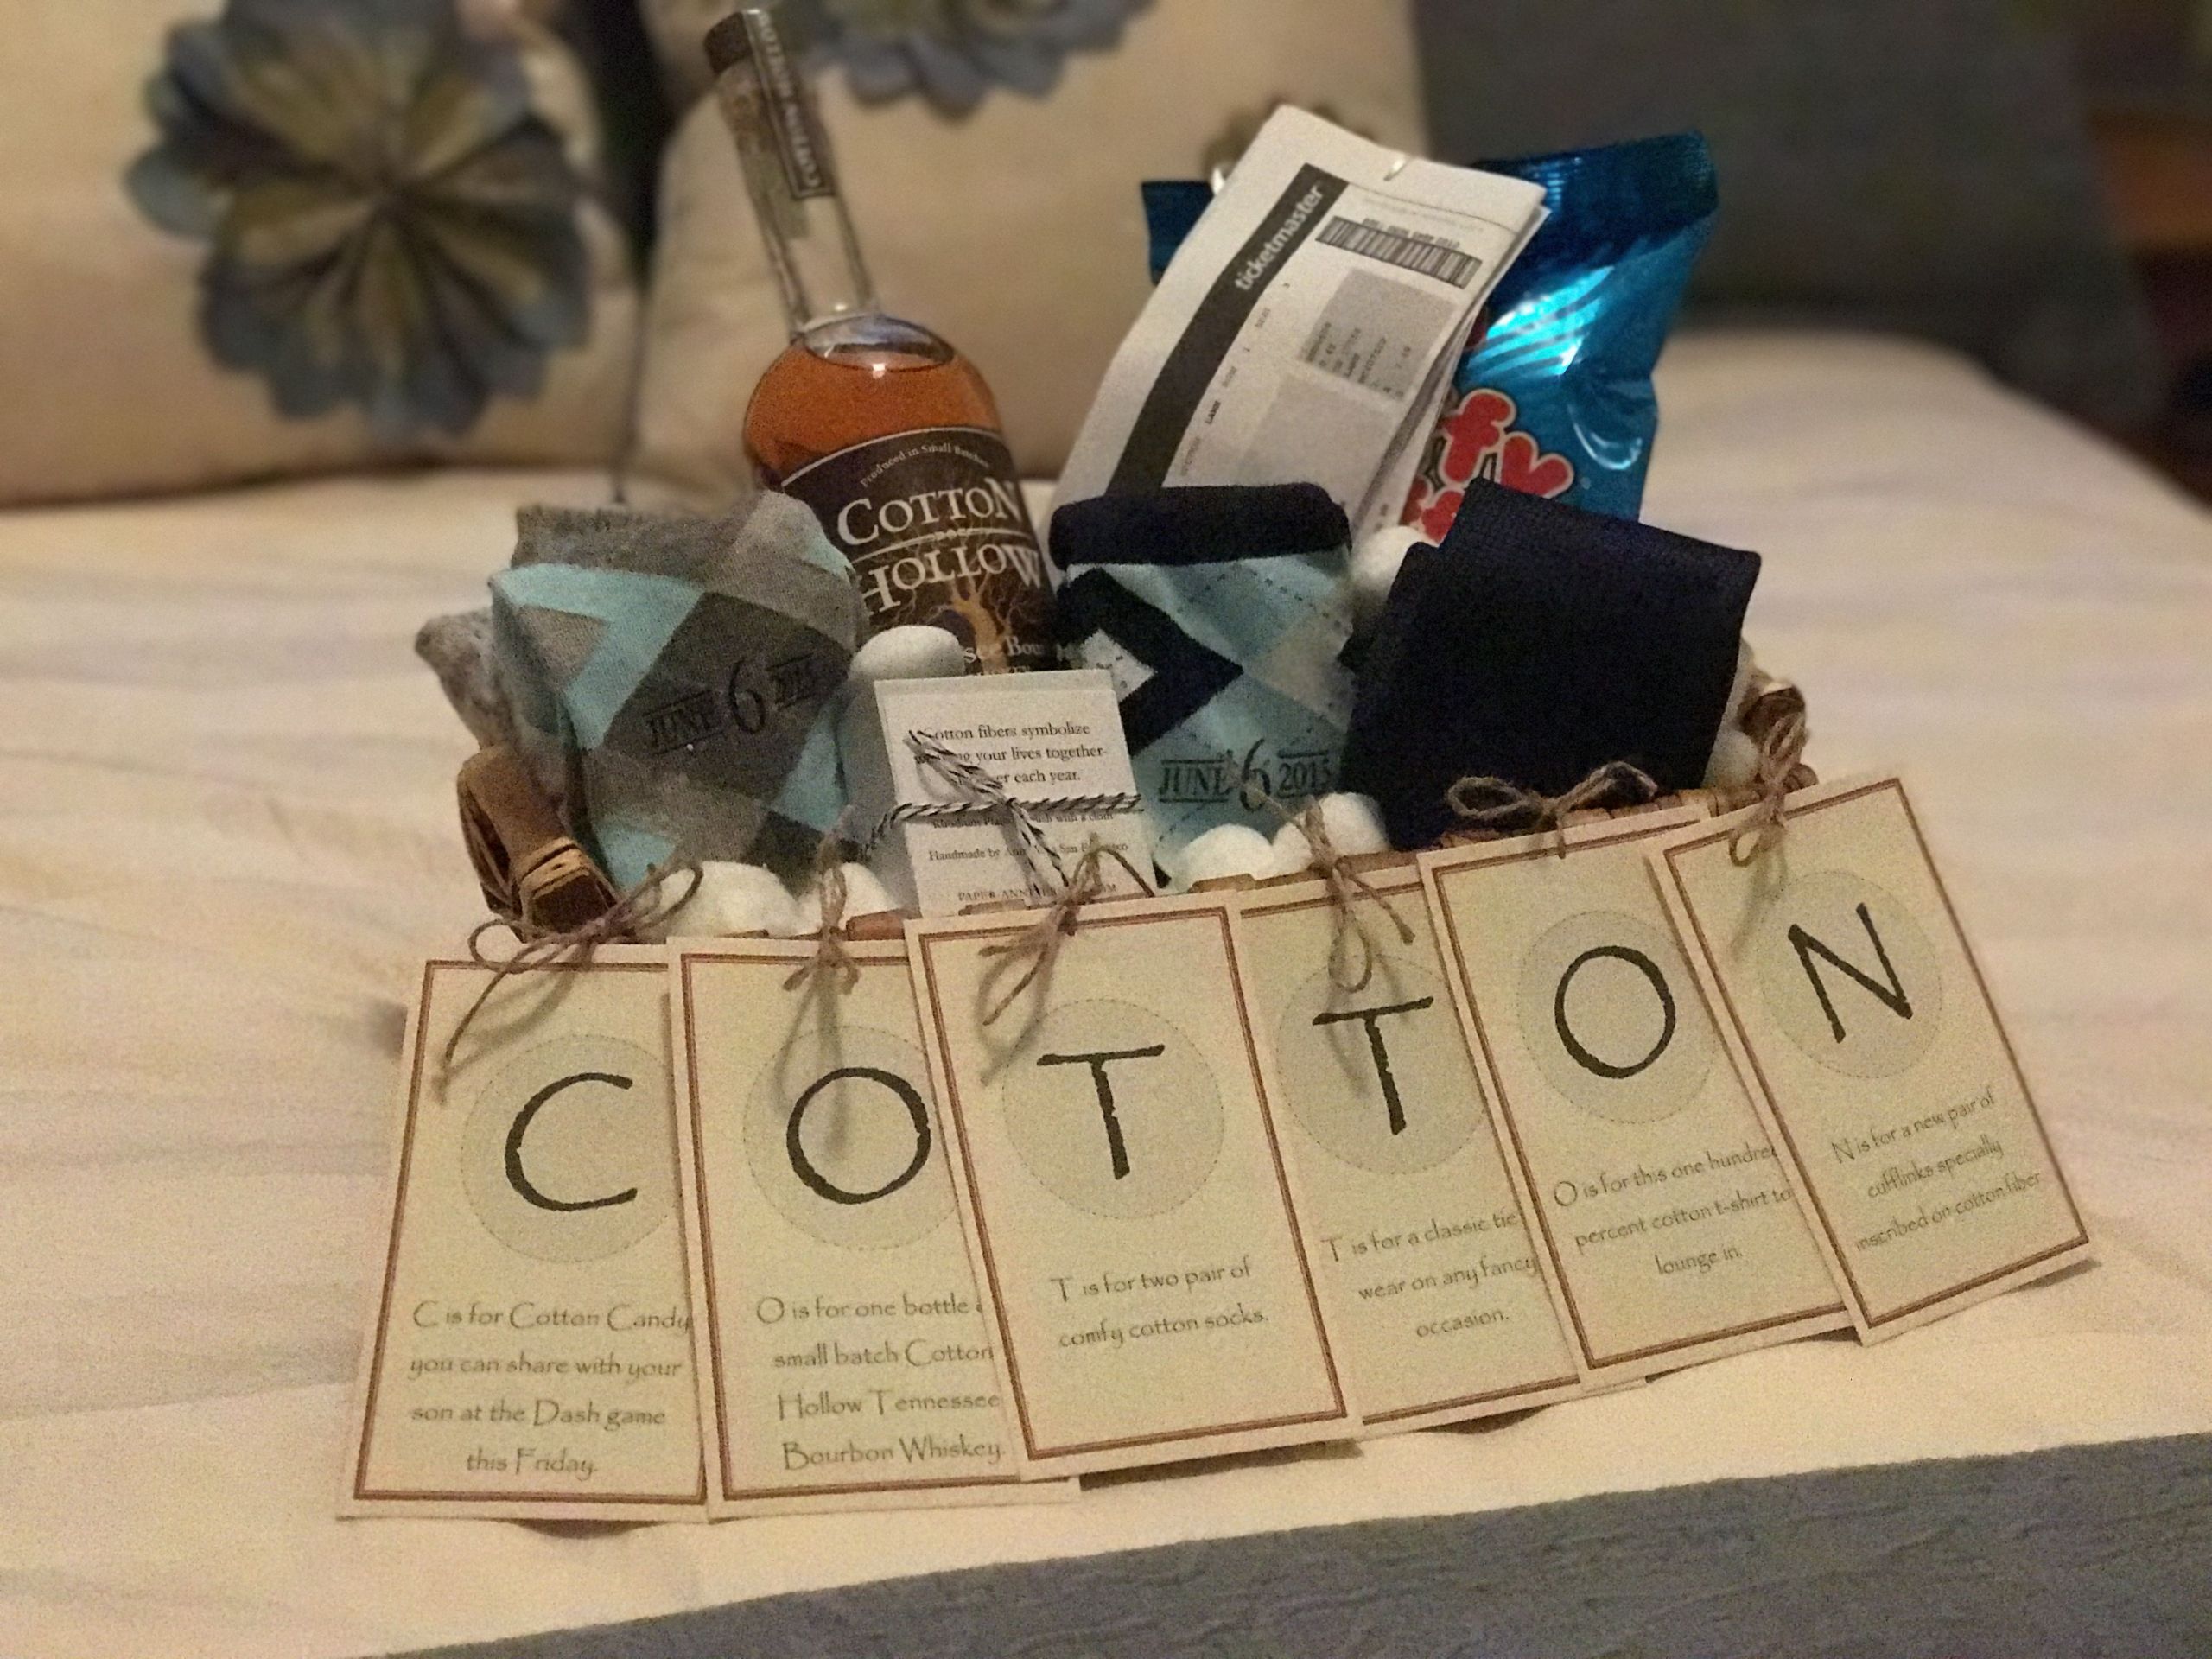 2 Year Wedding Anniversary Gifts For Him
 The "Cotton" Anniversary Gift for Him